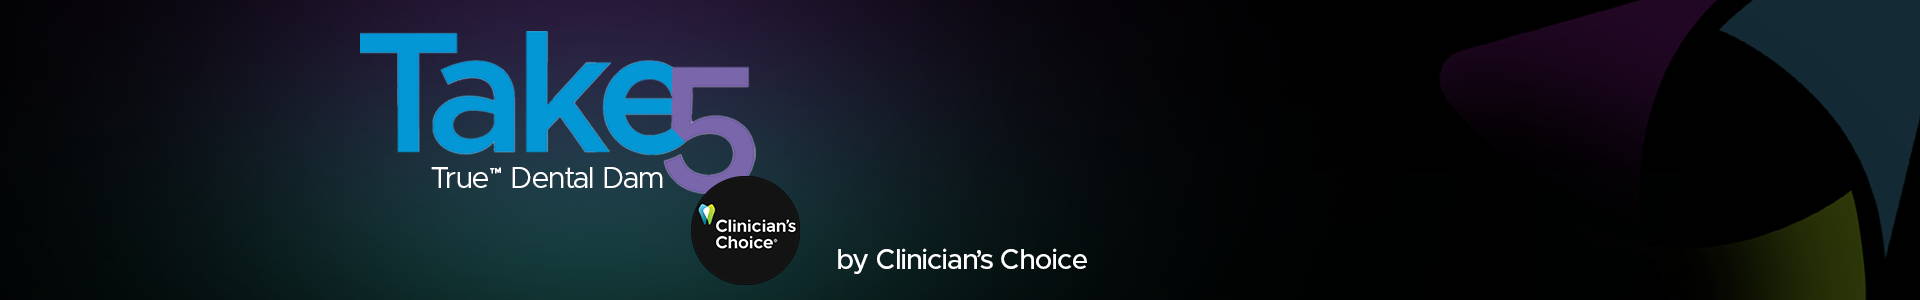 blog banner with Take 5 logo and Clinicians Choice logo